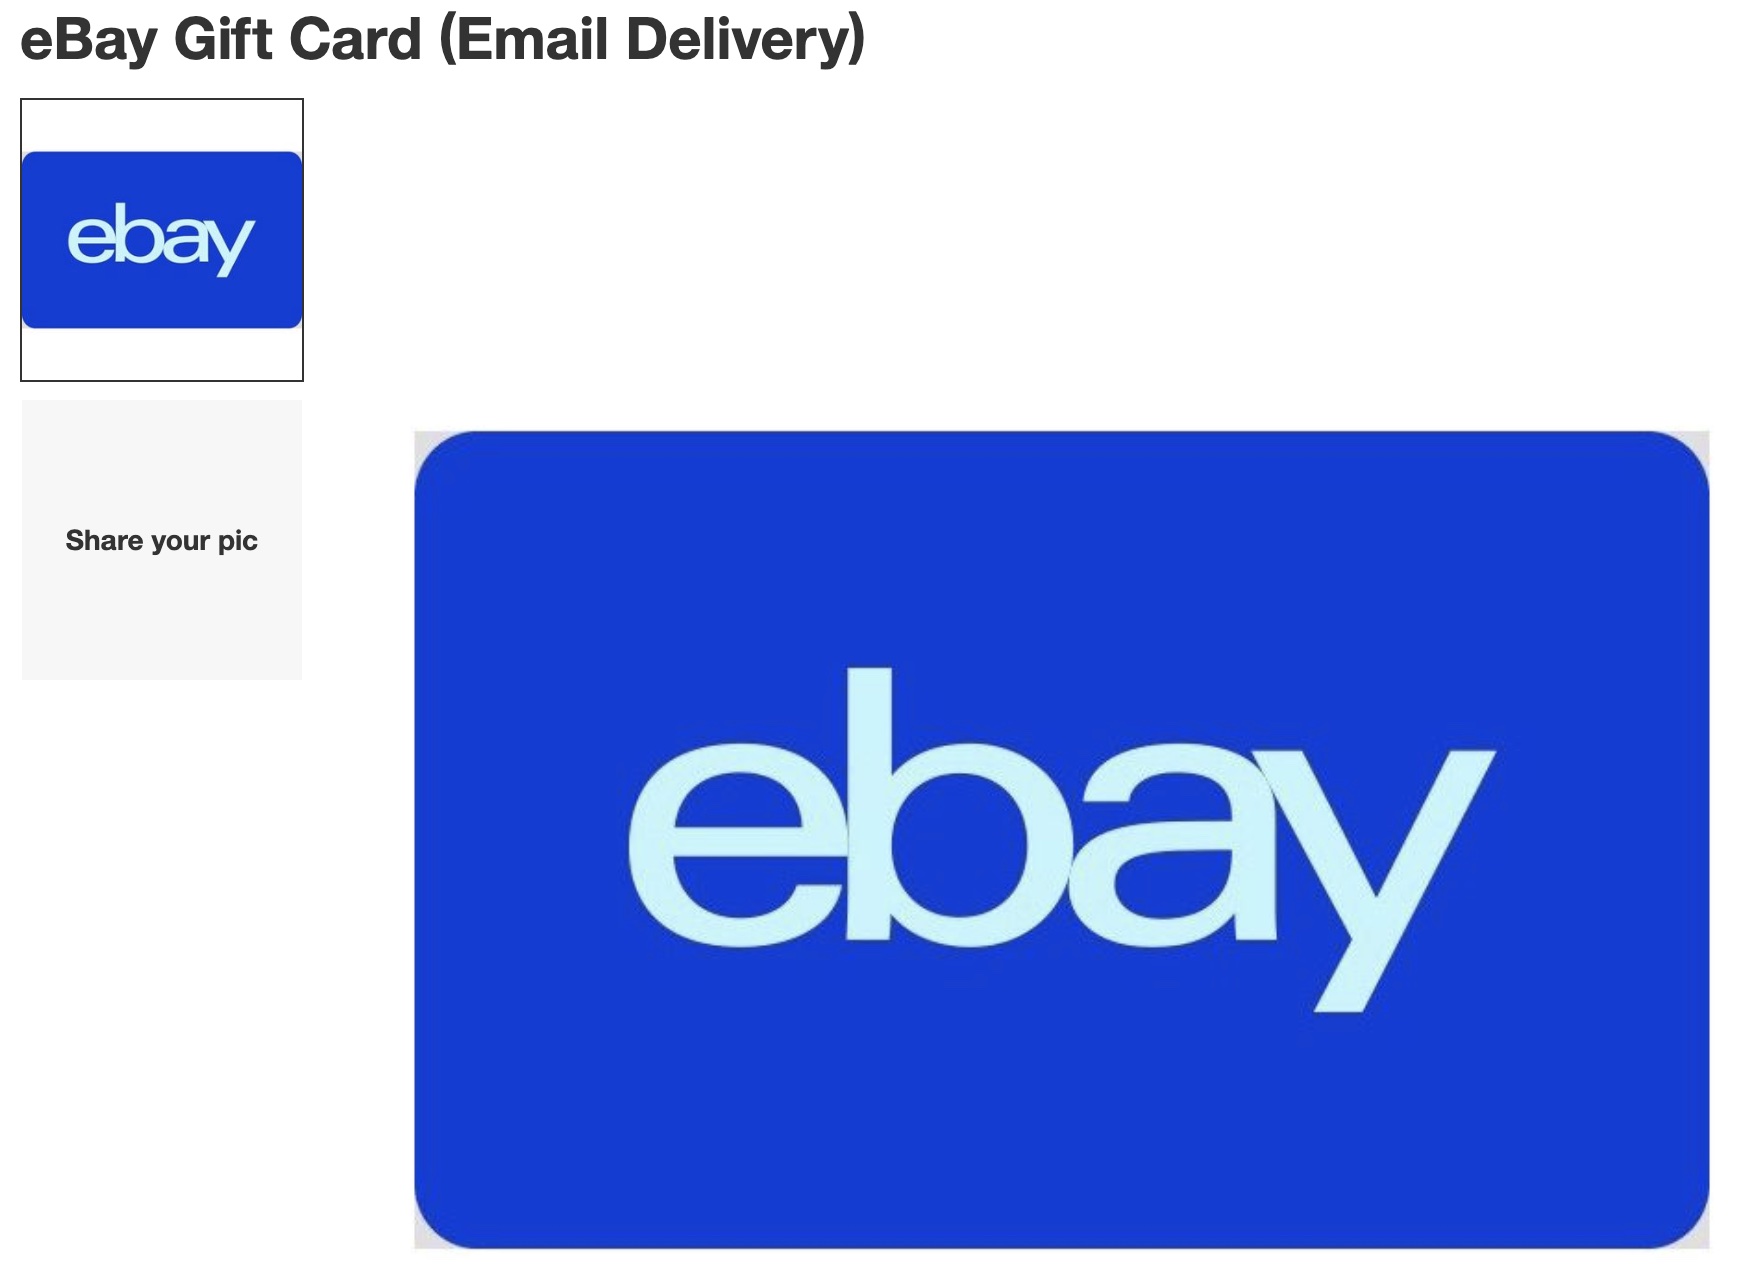 Does Walmart Carry Ebay Gift Cards?